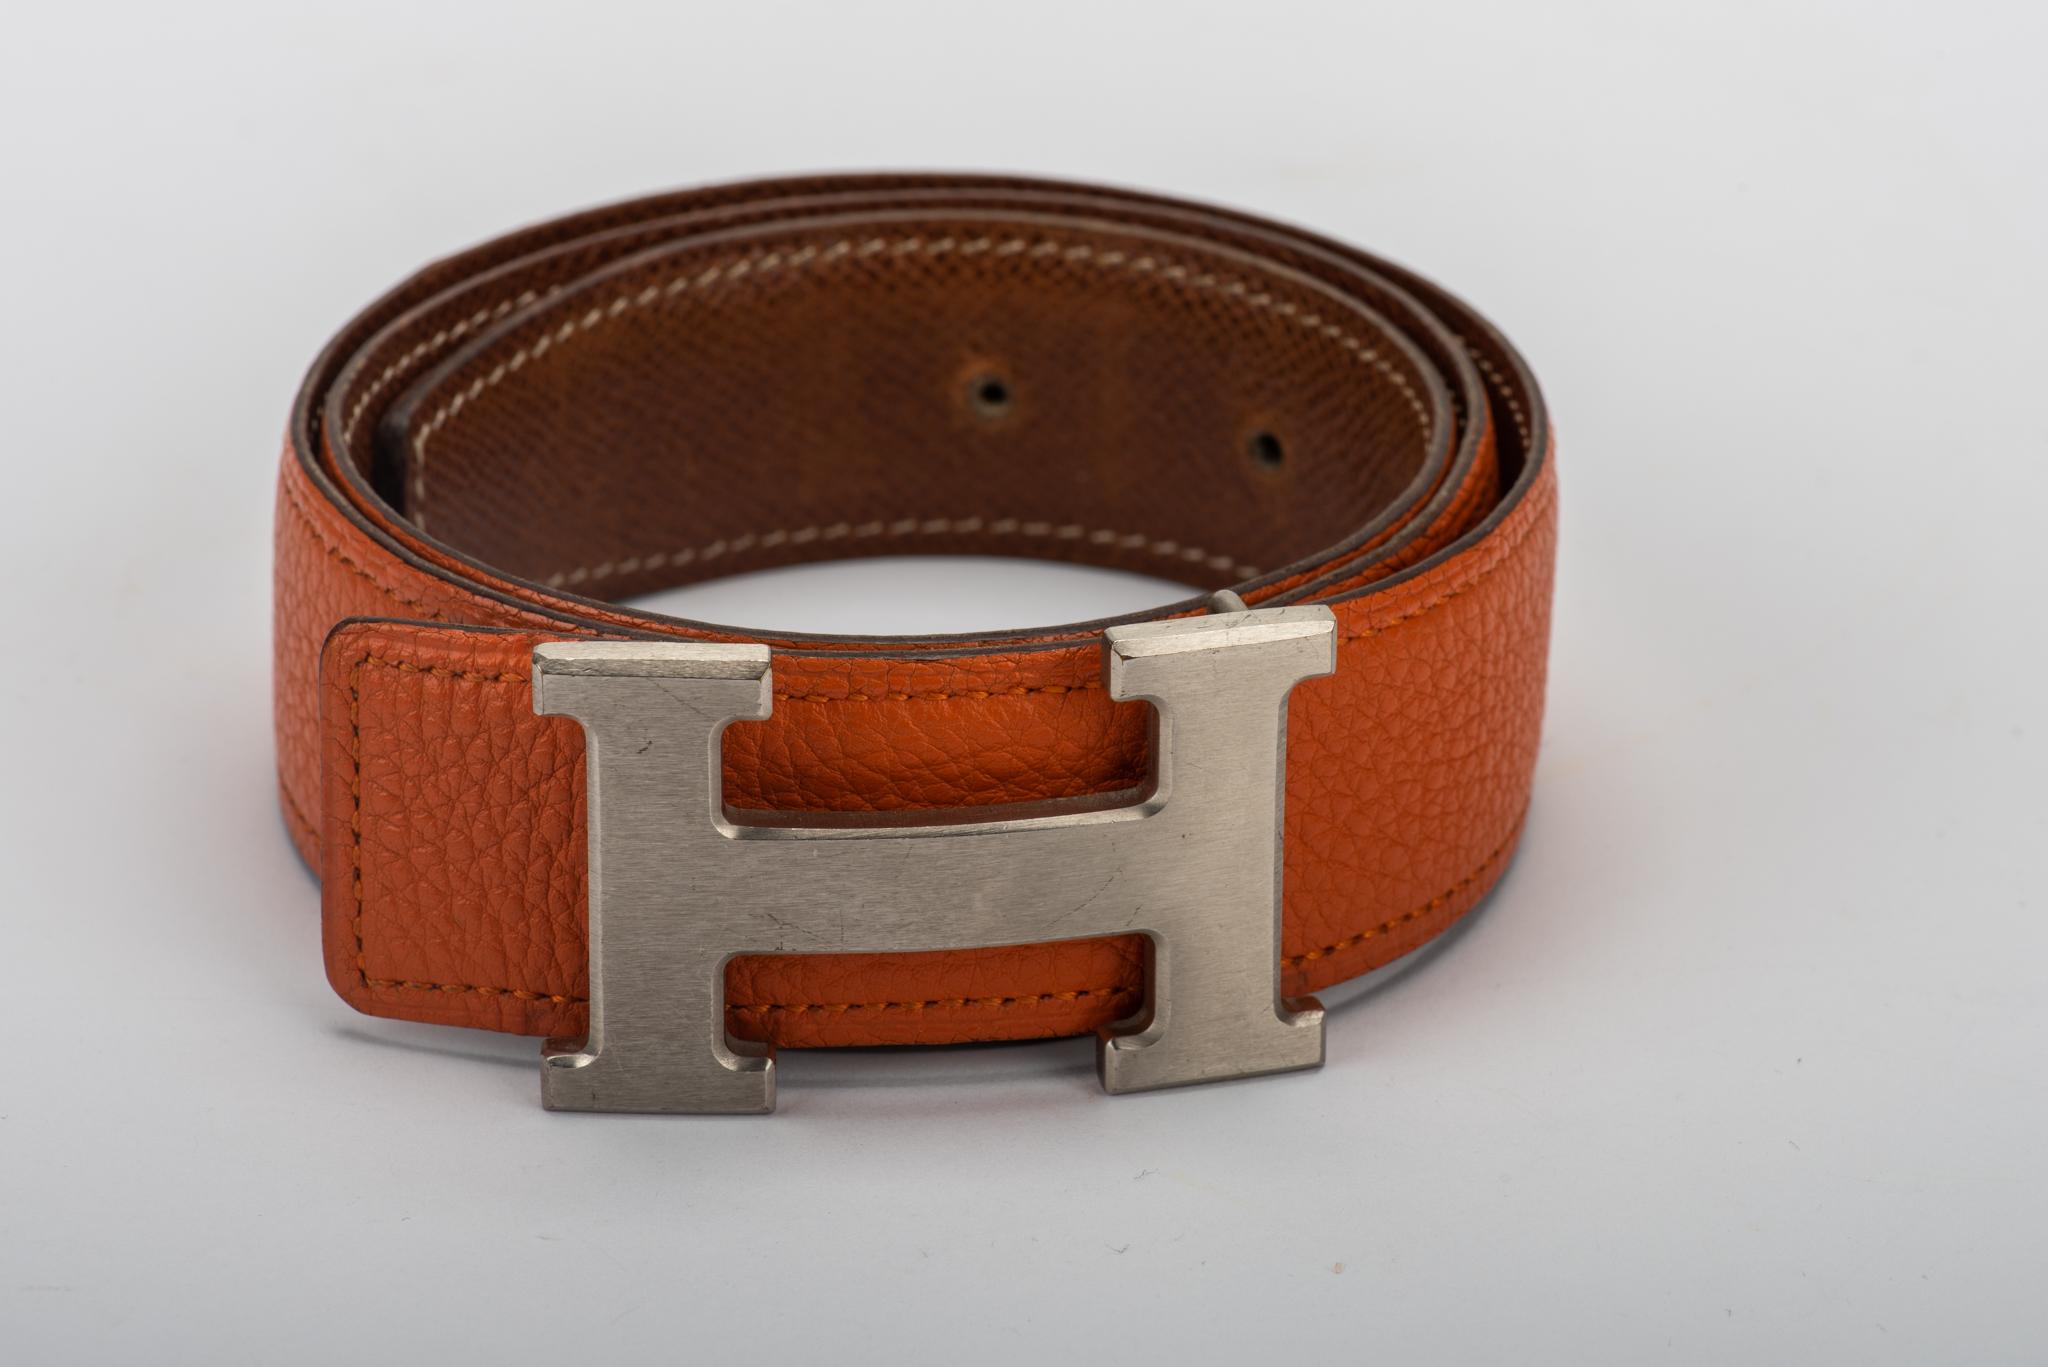 Hermès reversible leather H belt. Gold Epsom leather, orange clemence leather, and satin palladium belt buckle combination. Size 70 cm. Date stamp E for 2001. Comes with original dust bag. Minor scuffs on metal.